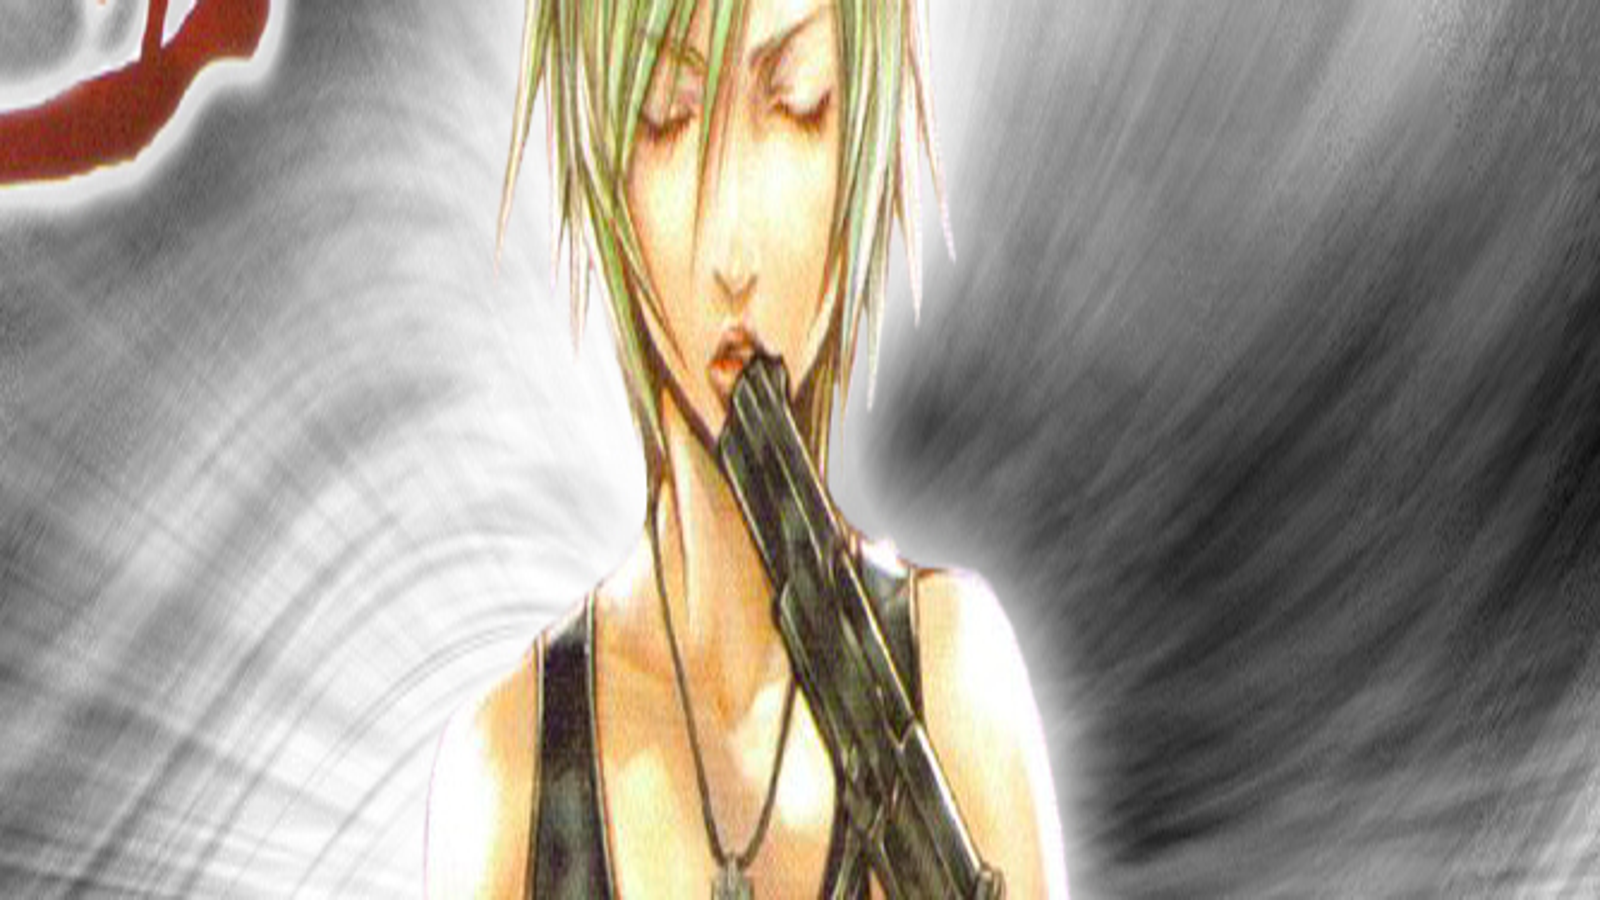 Viewing full size Parasite Eve III box cover